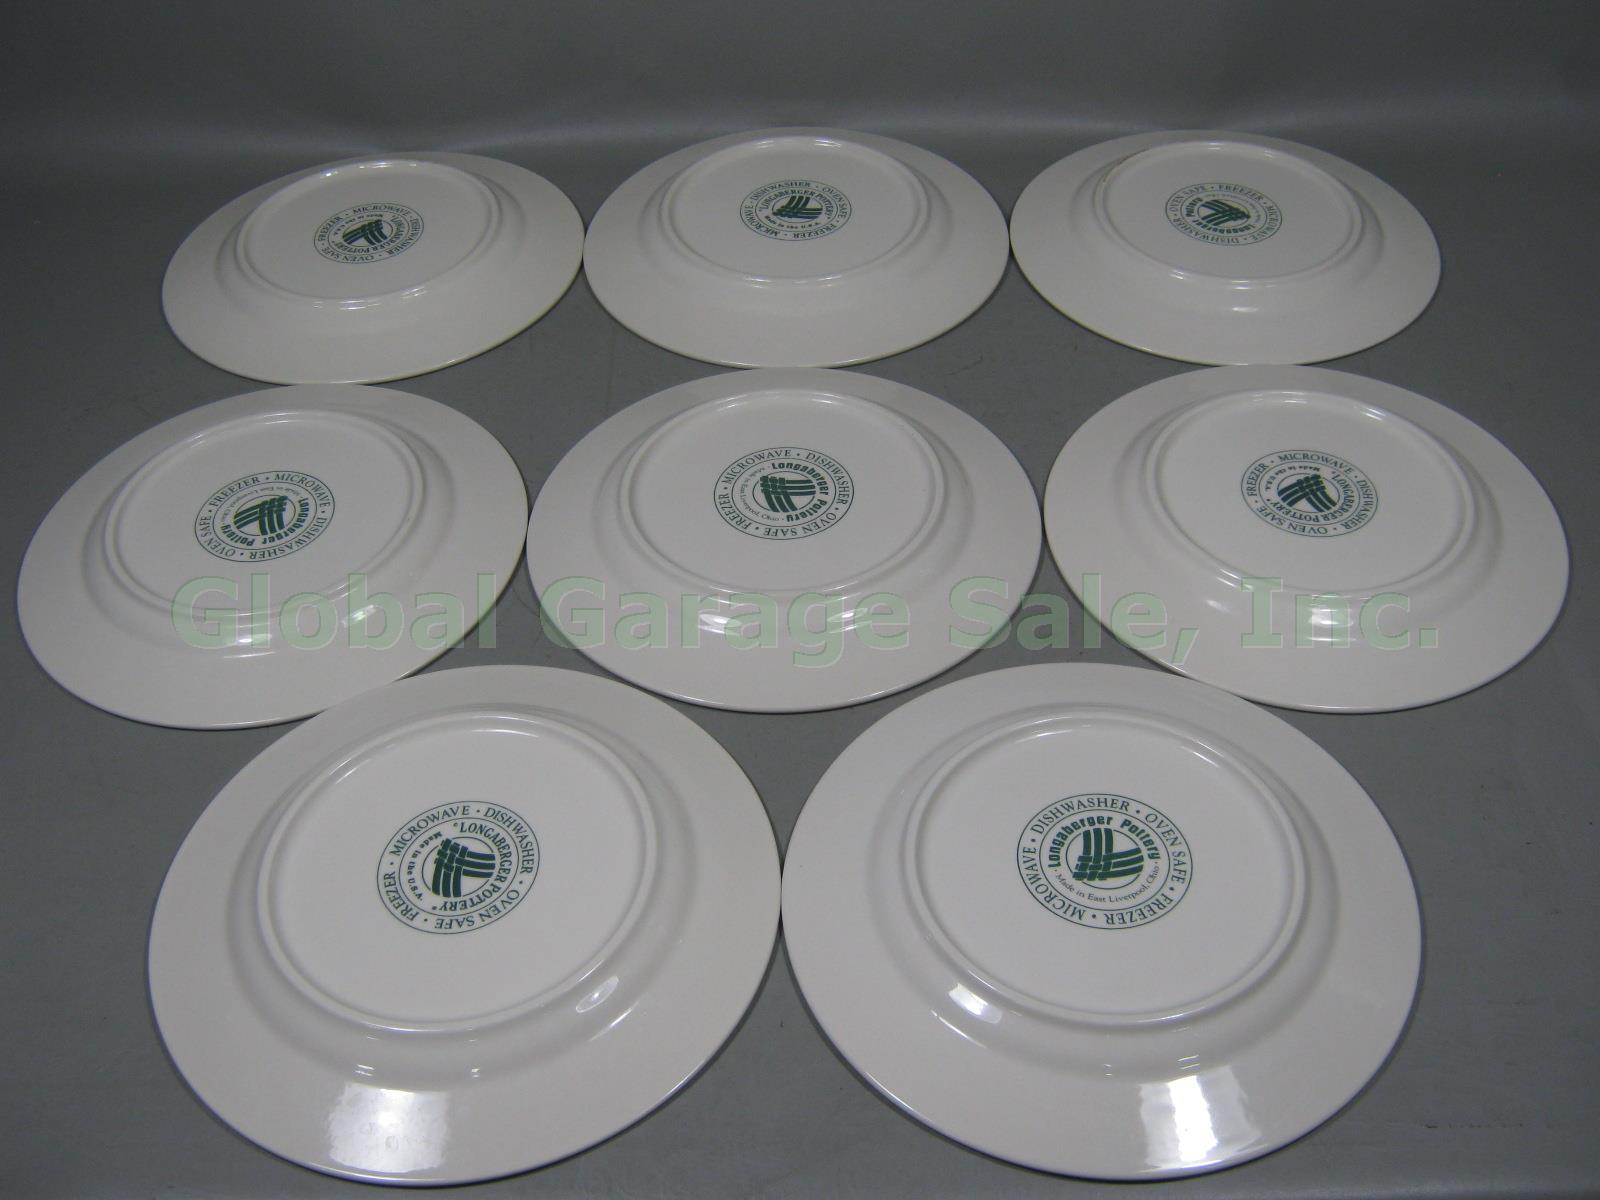 8 Longaberger Woven Traditions Heritage Green Dinner Plates Set Lot 10-1/4" NR!! 2